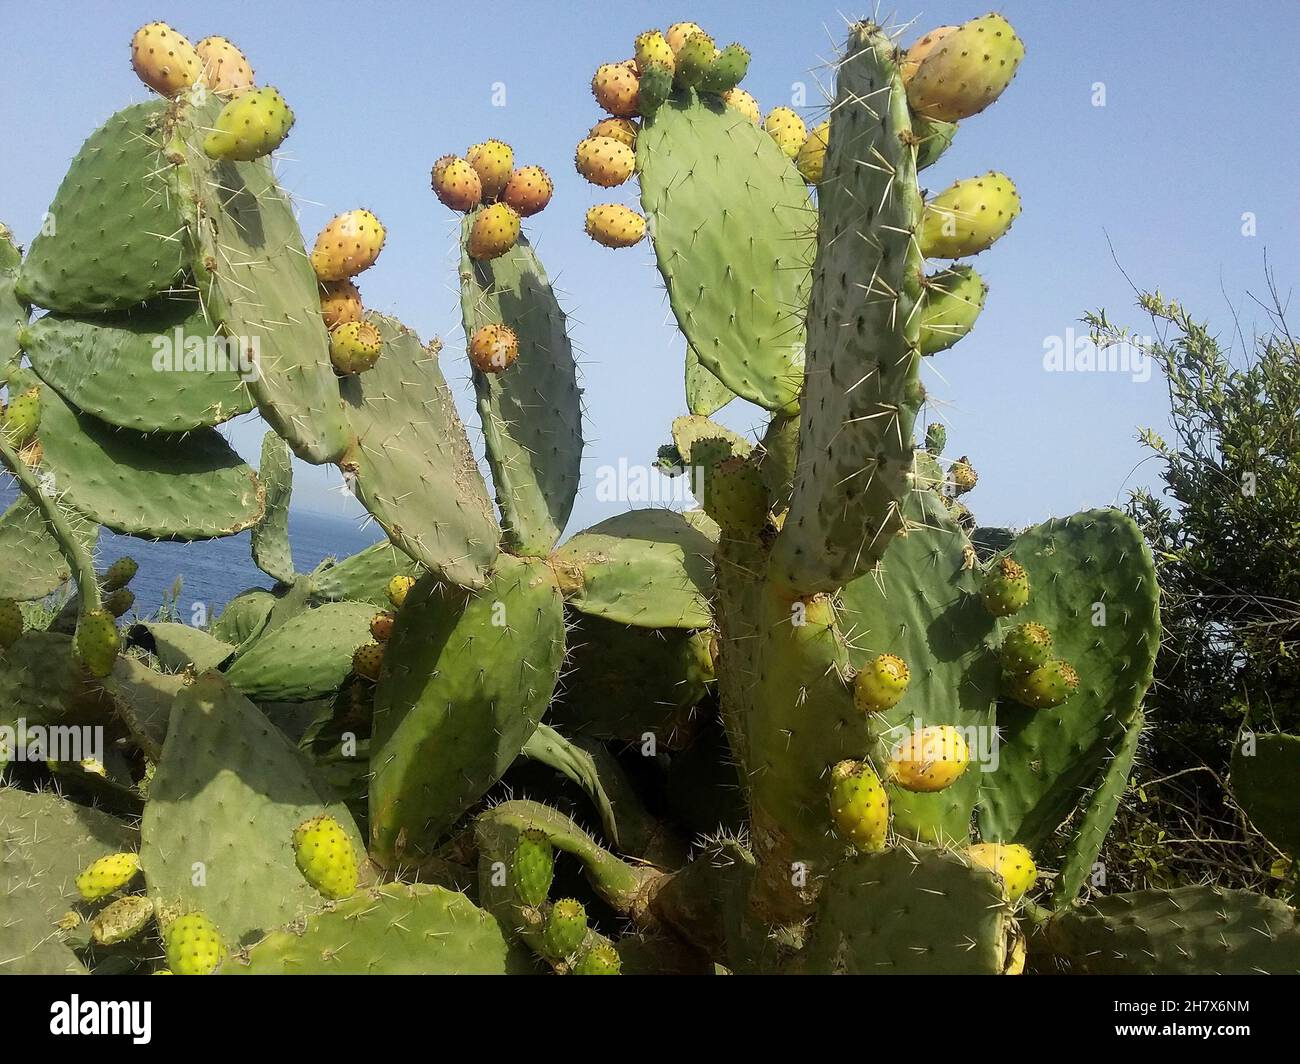 Prickly pear from Morocco in northern Africa Stock Photo